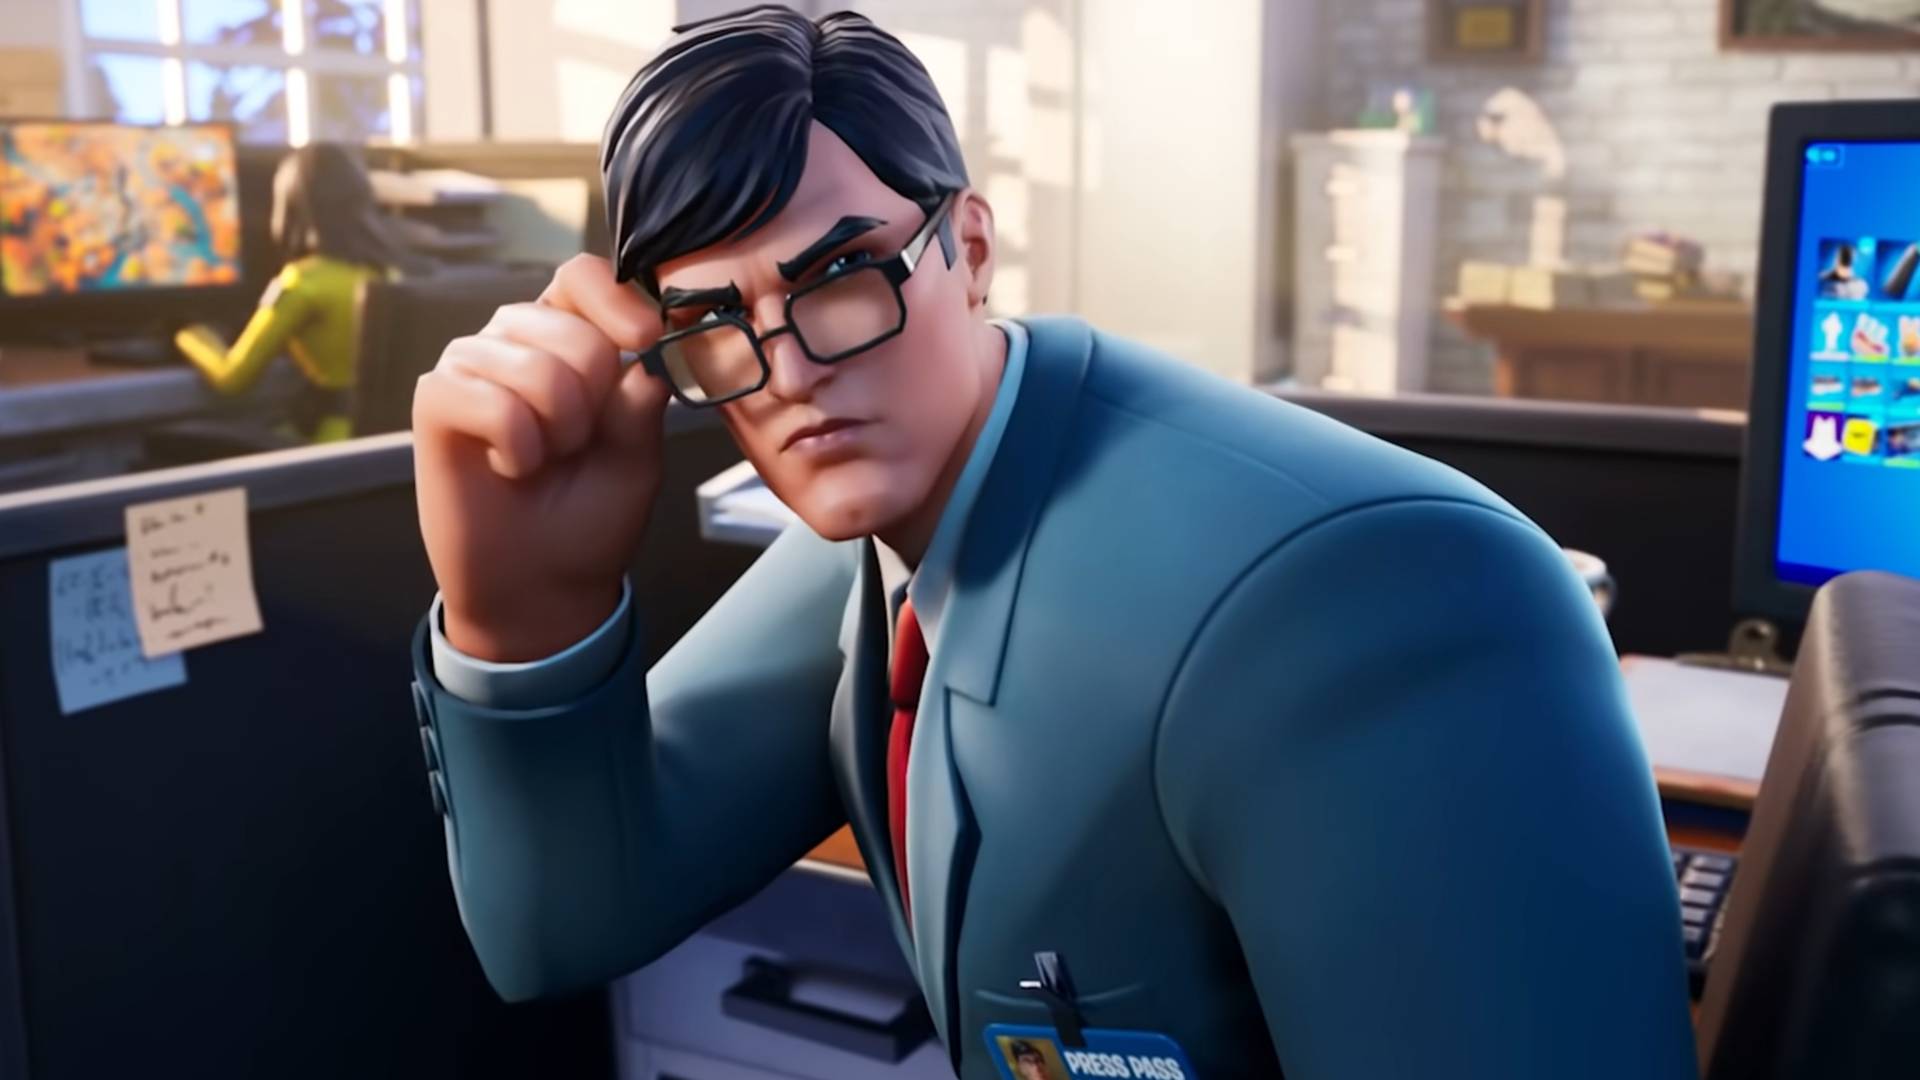 How to get the Clark Kent skin in Fortnite